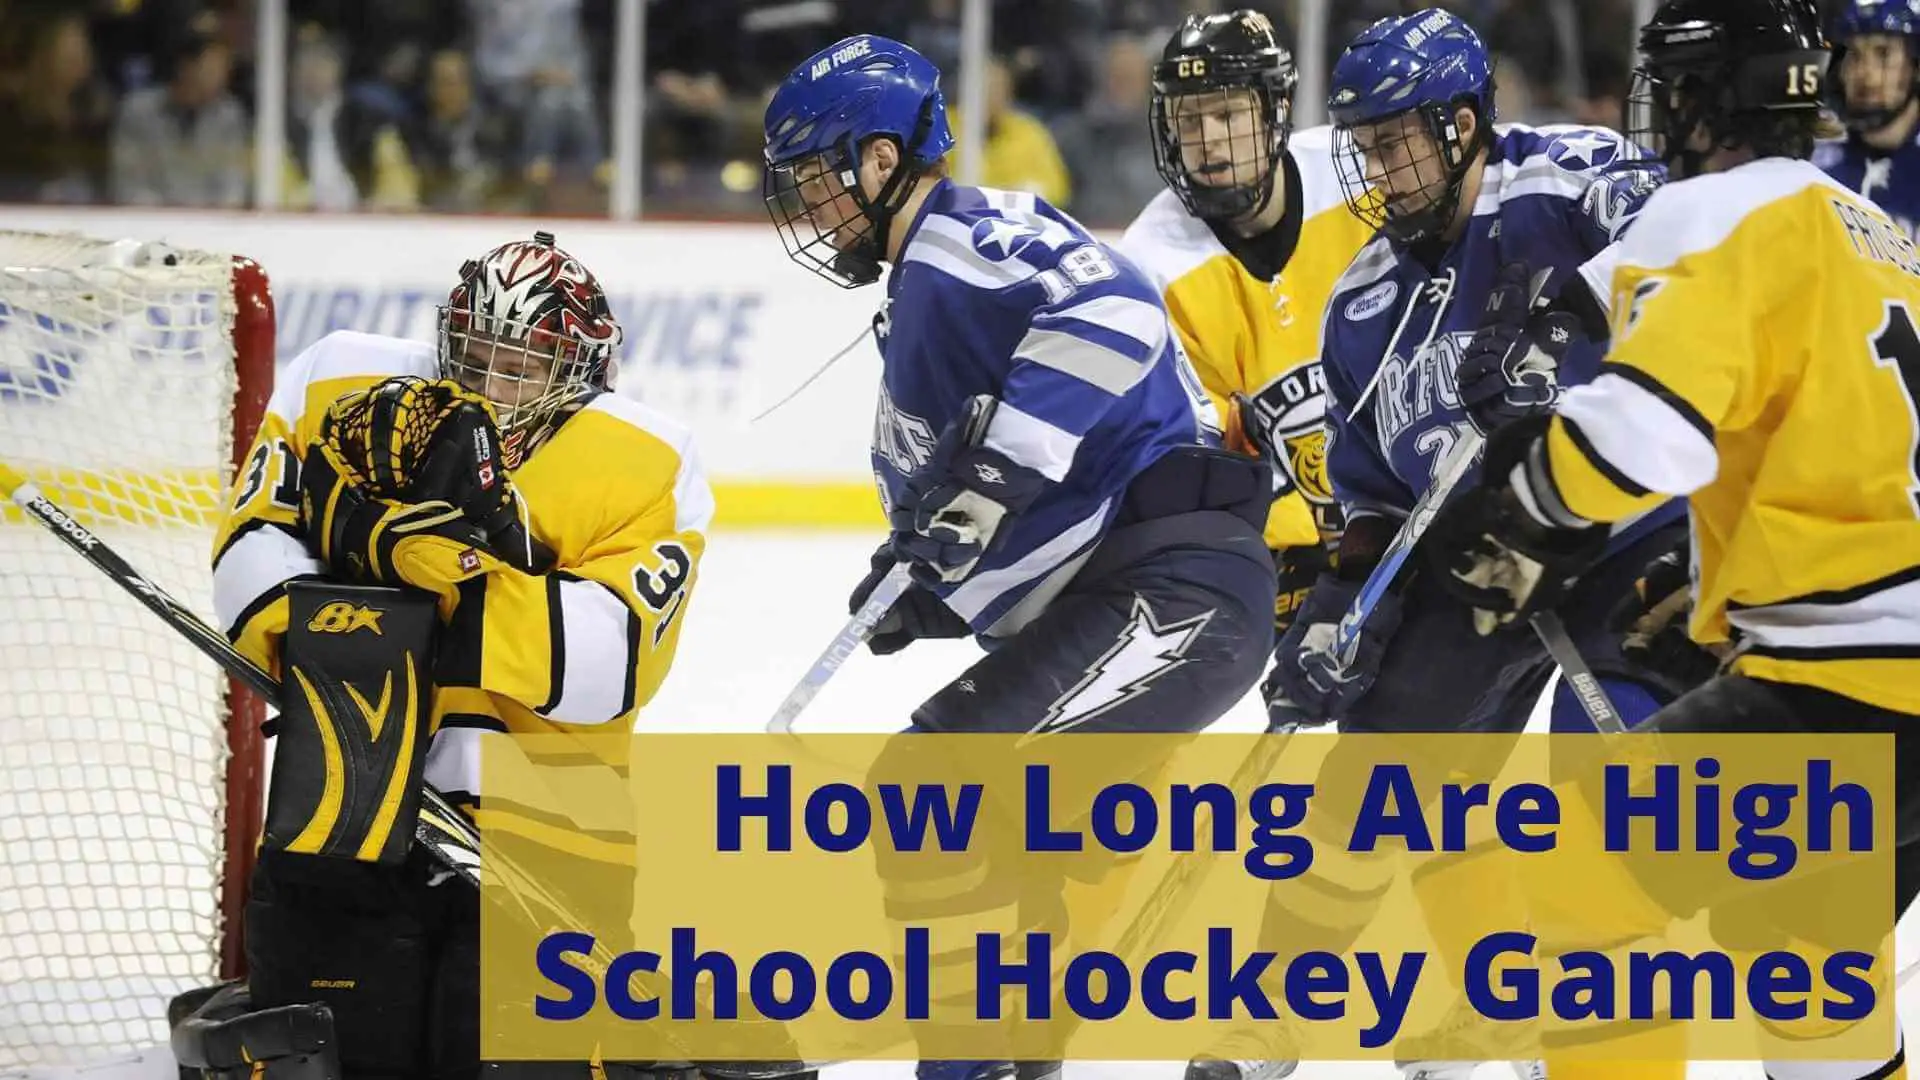 How long are high school hockey games